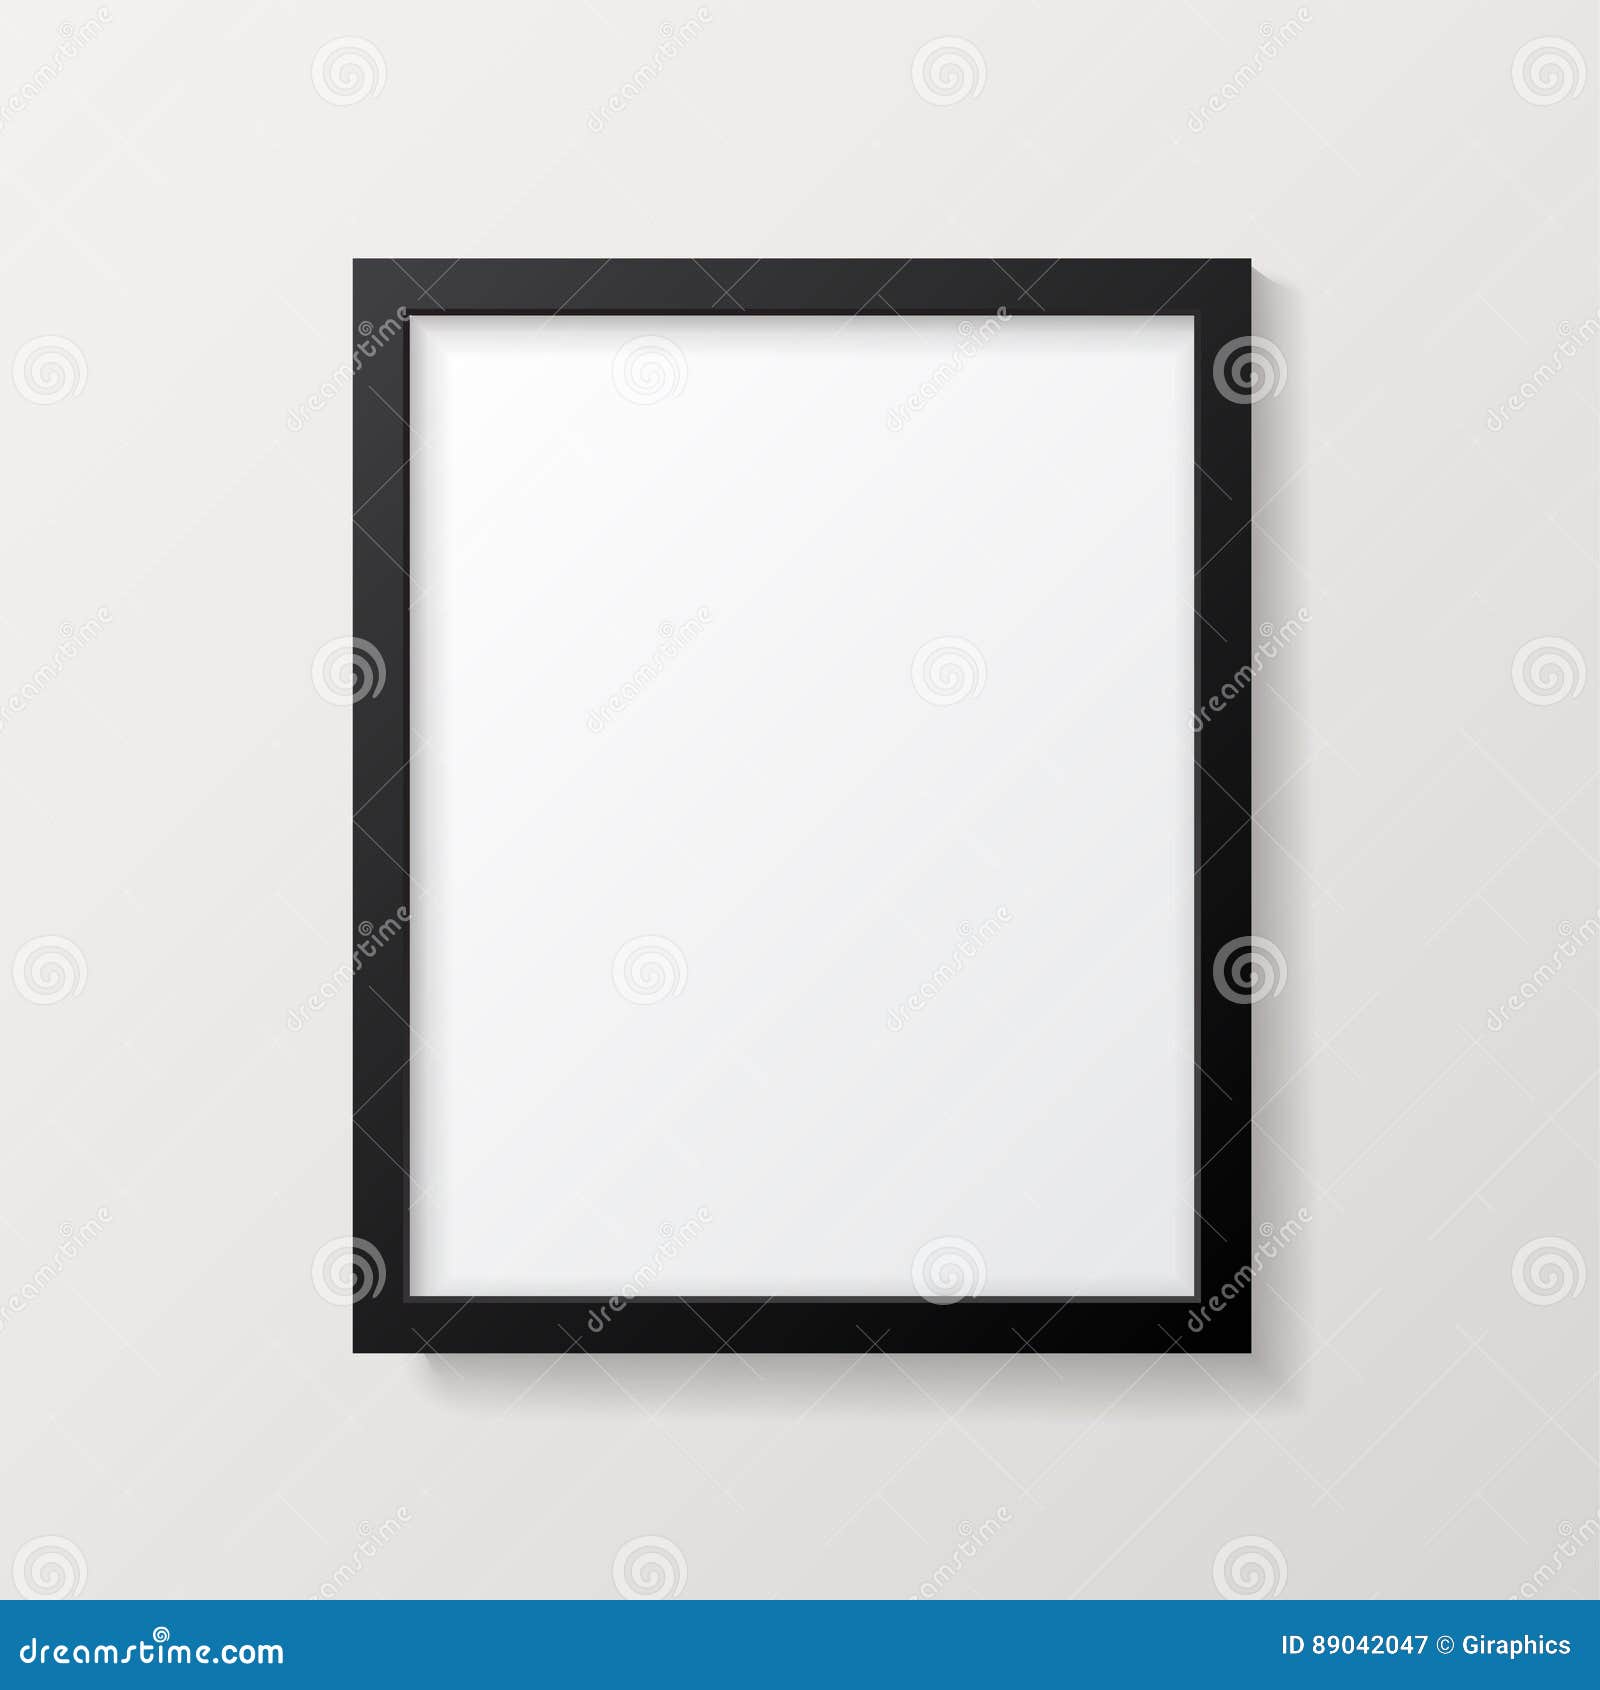 realistic empty black picture frame mockup